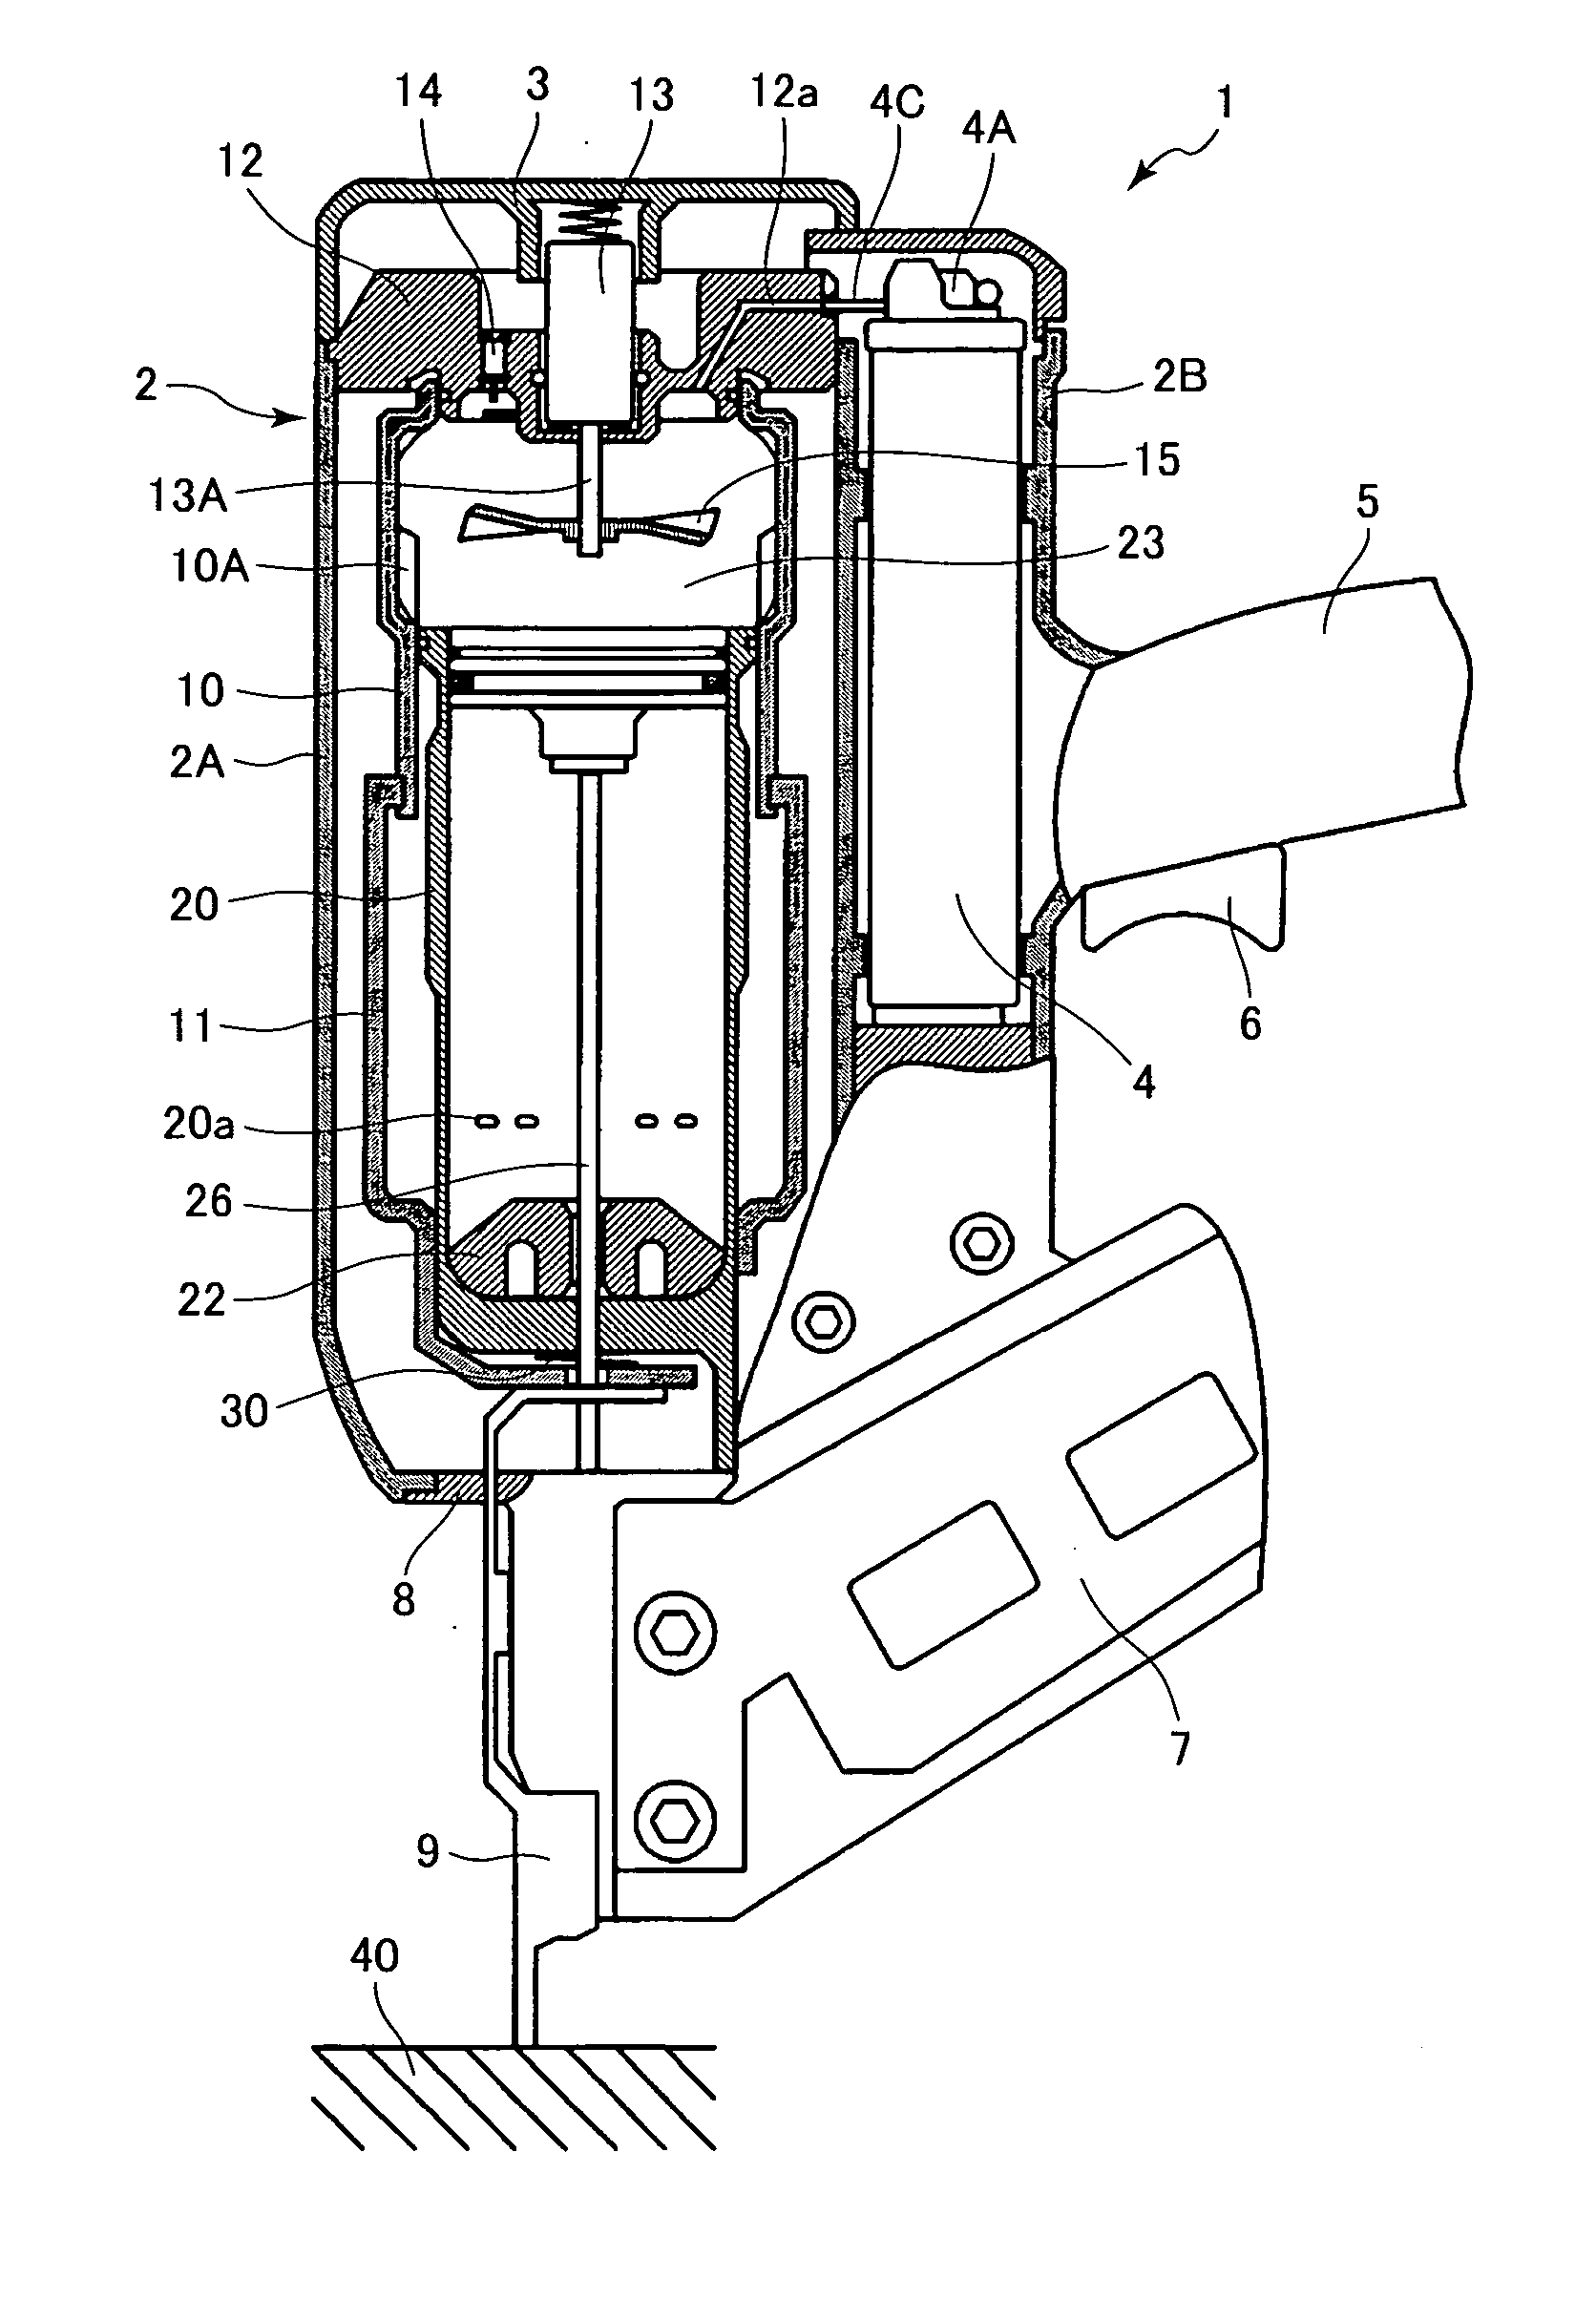 Combustion-type power tool providing specific spark energy